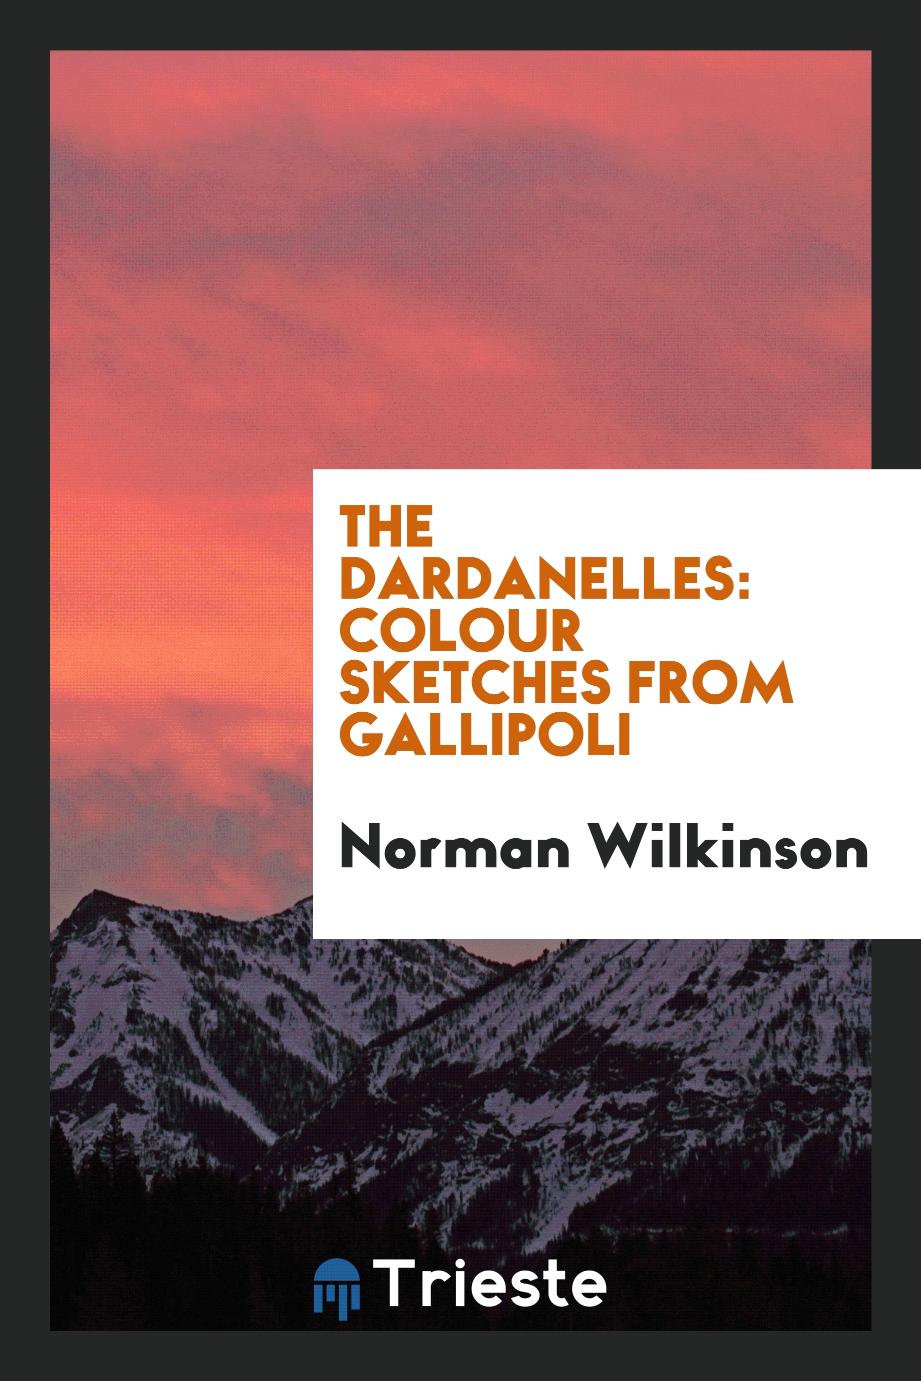 The Dardanelles: colour sketches from Gallipoli